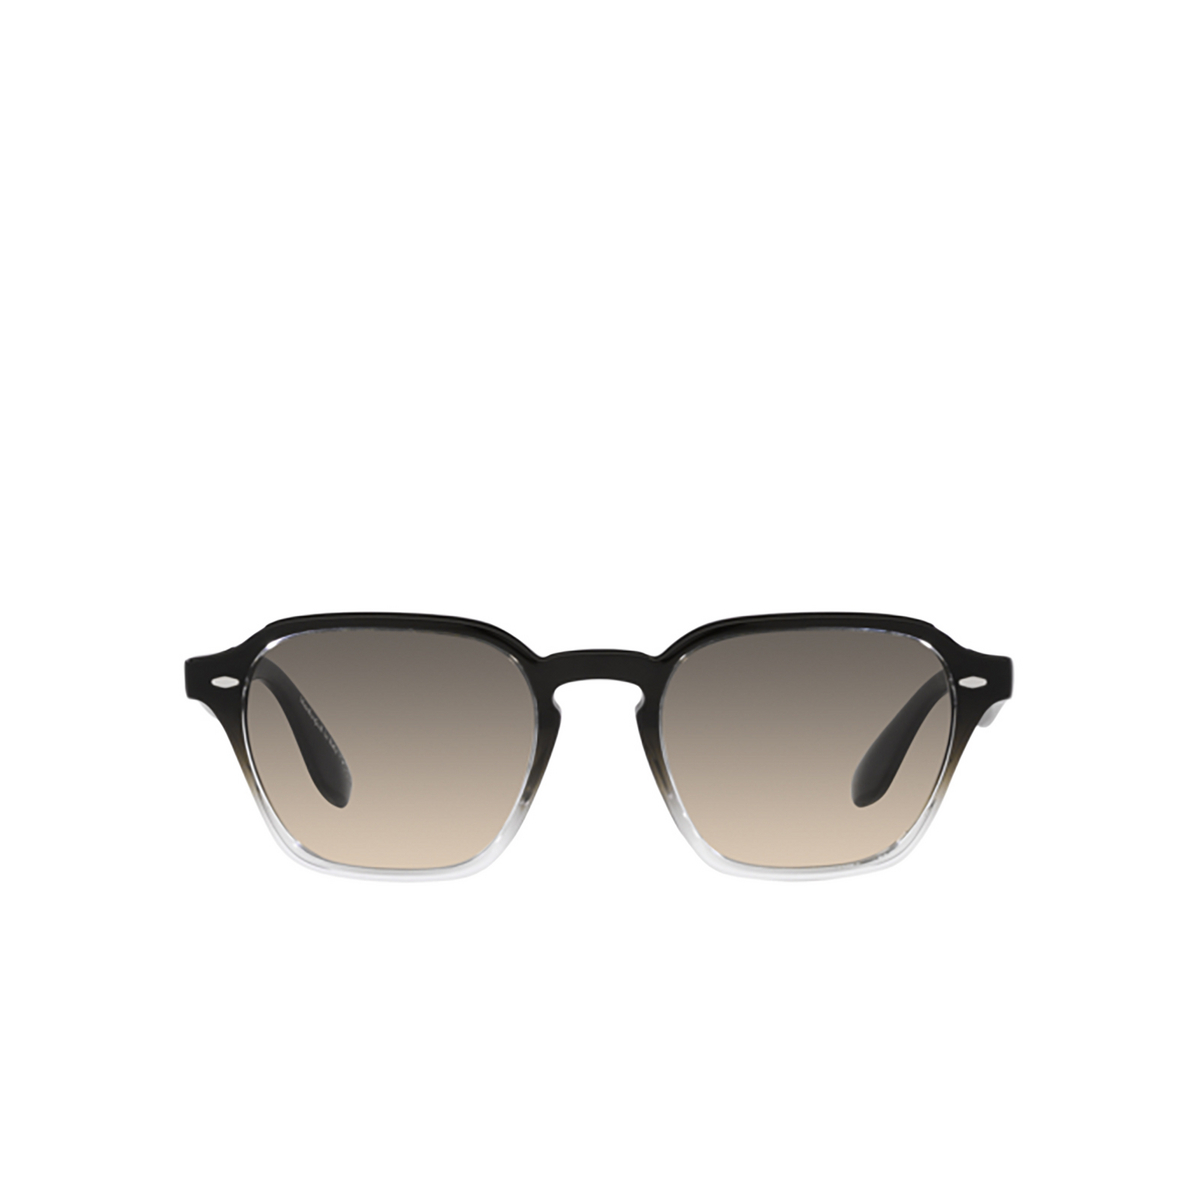 Occhiali da sole Oliver Peoples GRIFFO 175132 Dark military / Crystal gradient - frontale